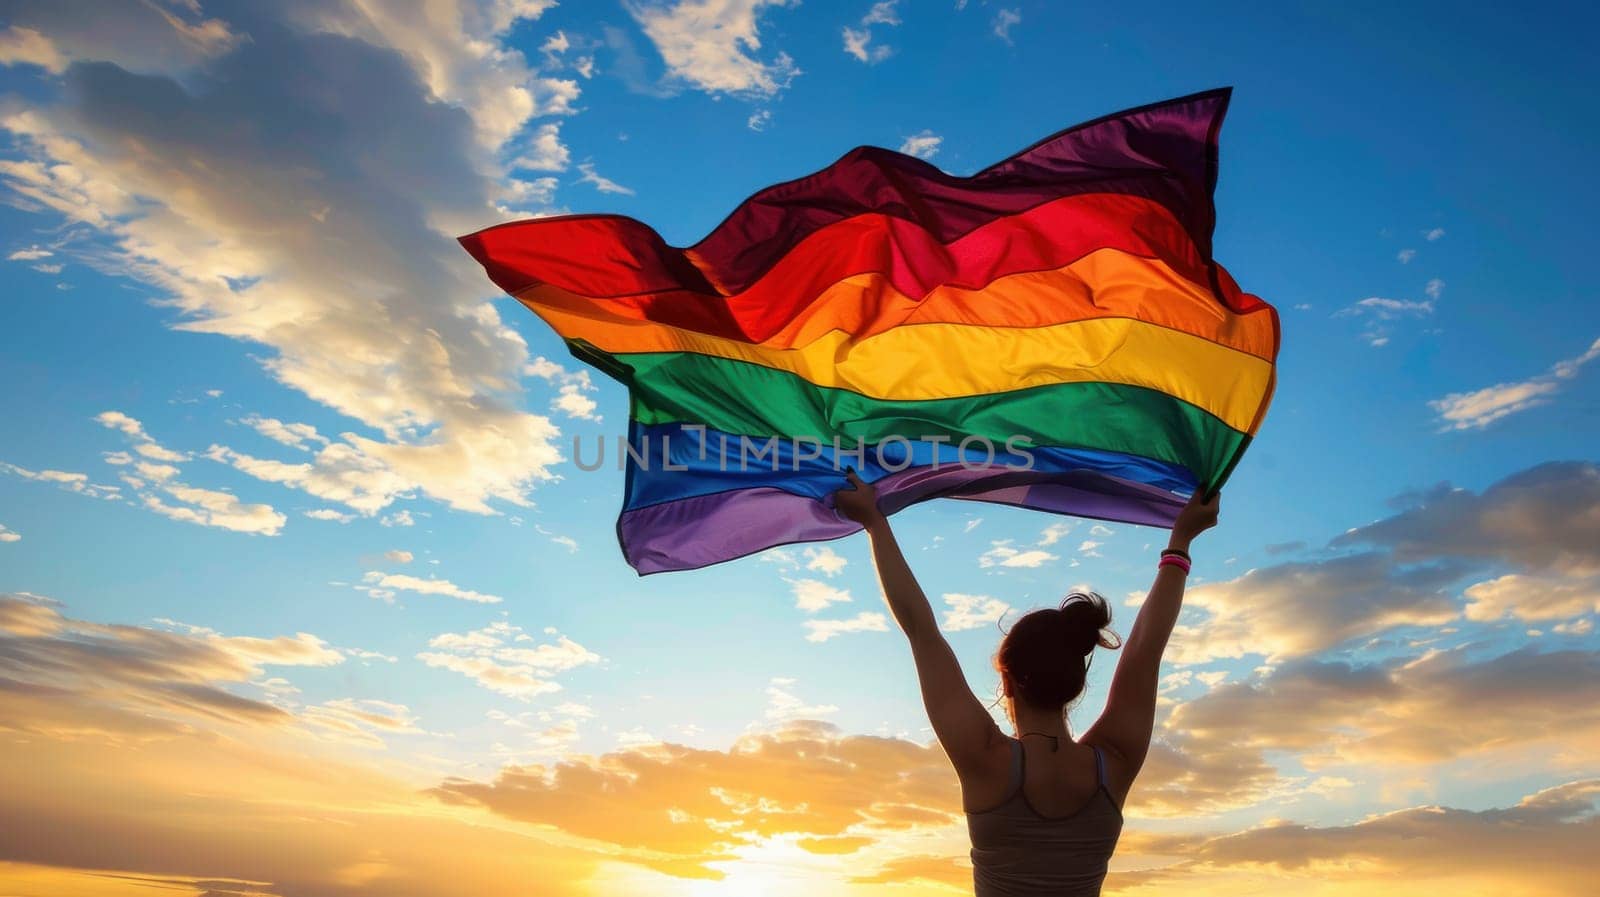 A strong and determined woman holding a pride flag.